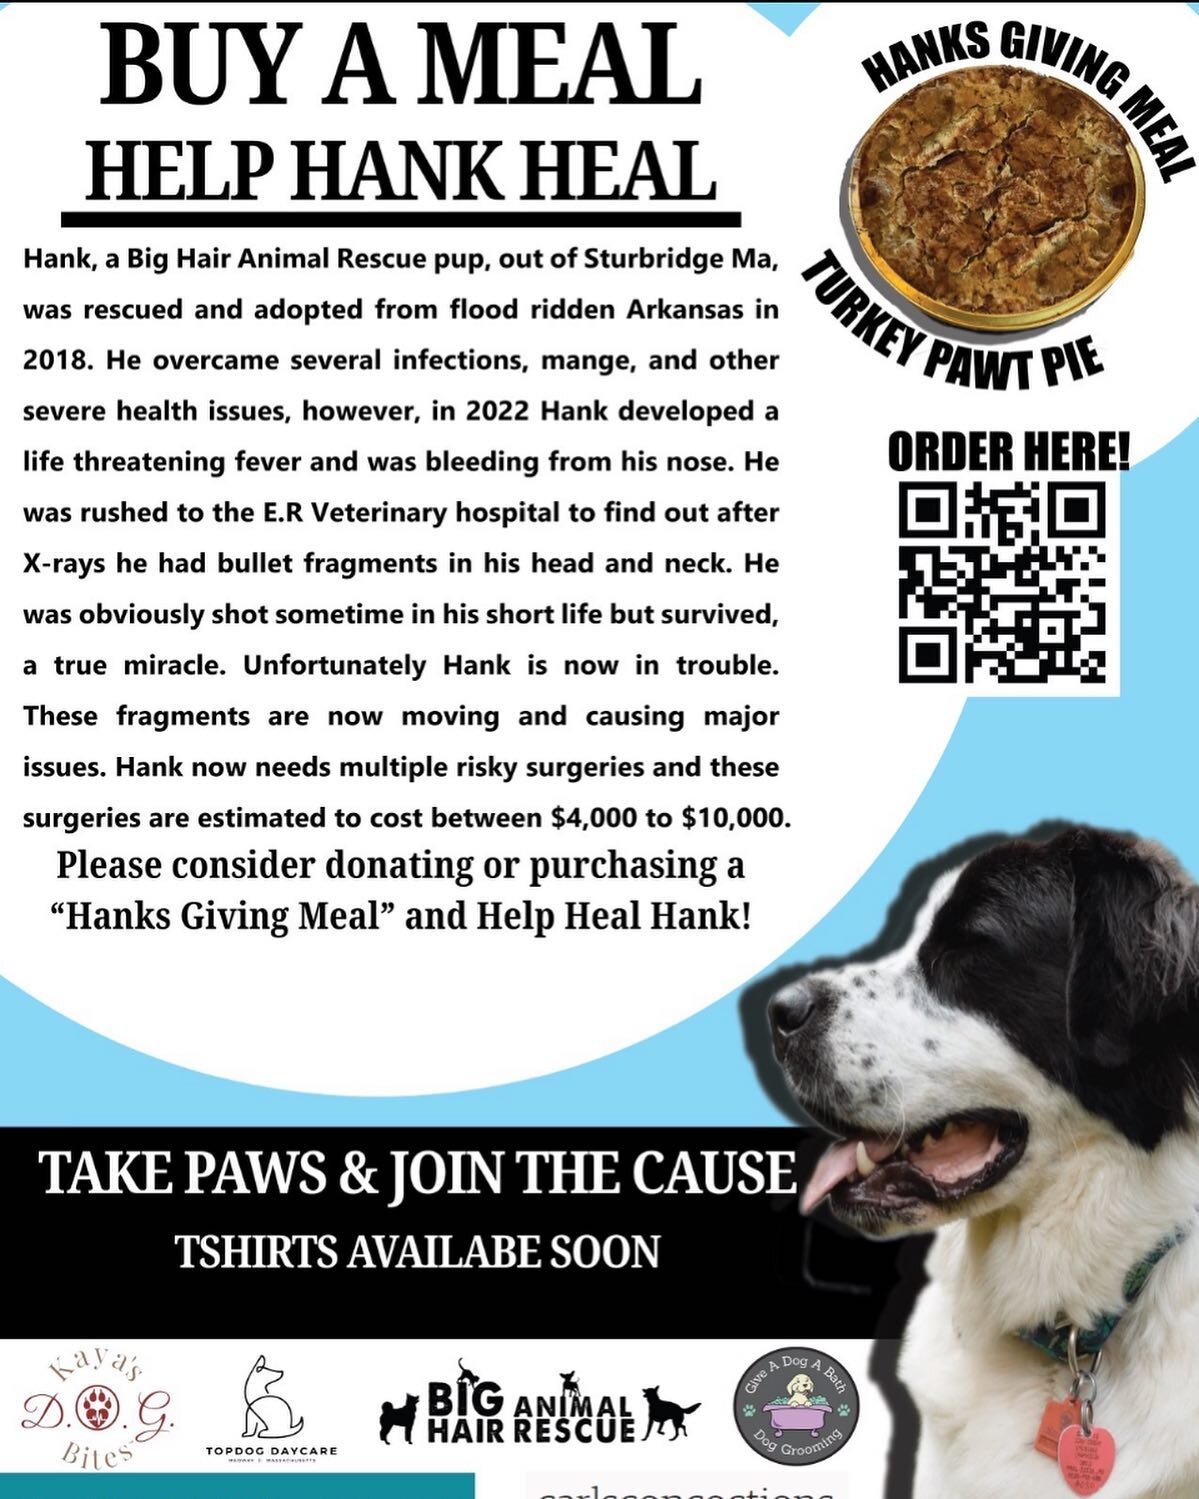 Sharon at Kaya&rsquo;s dog bites really knows how to rally up support! Please consider purchasing a meal to help Hank heal! We appreciate all the support received already!